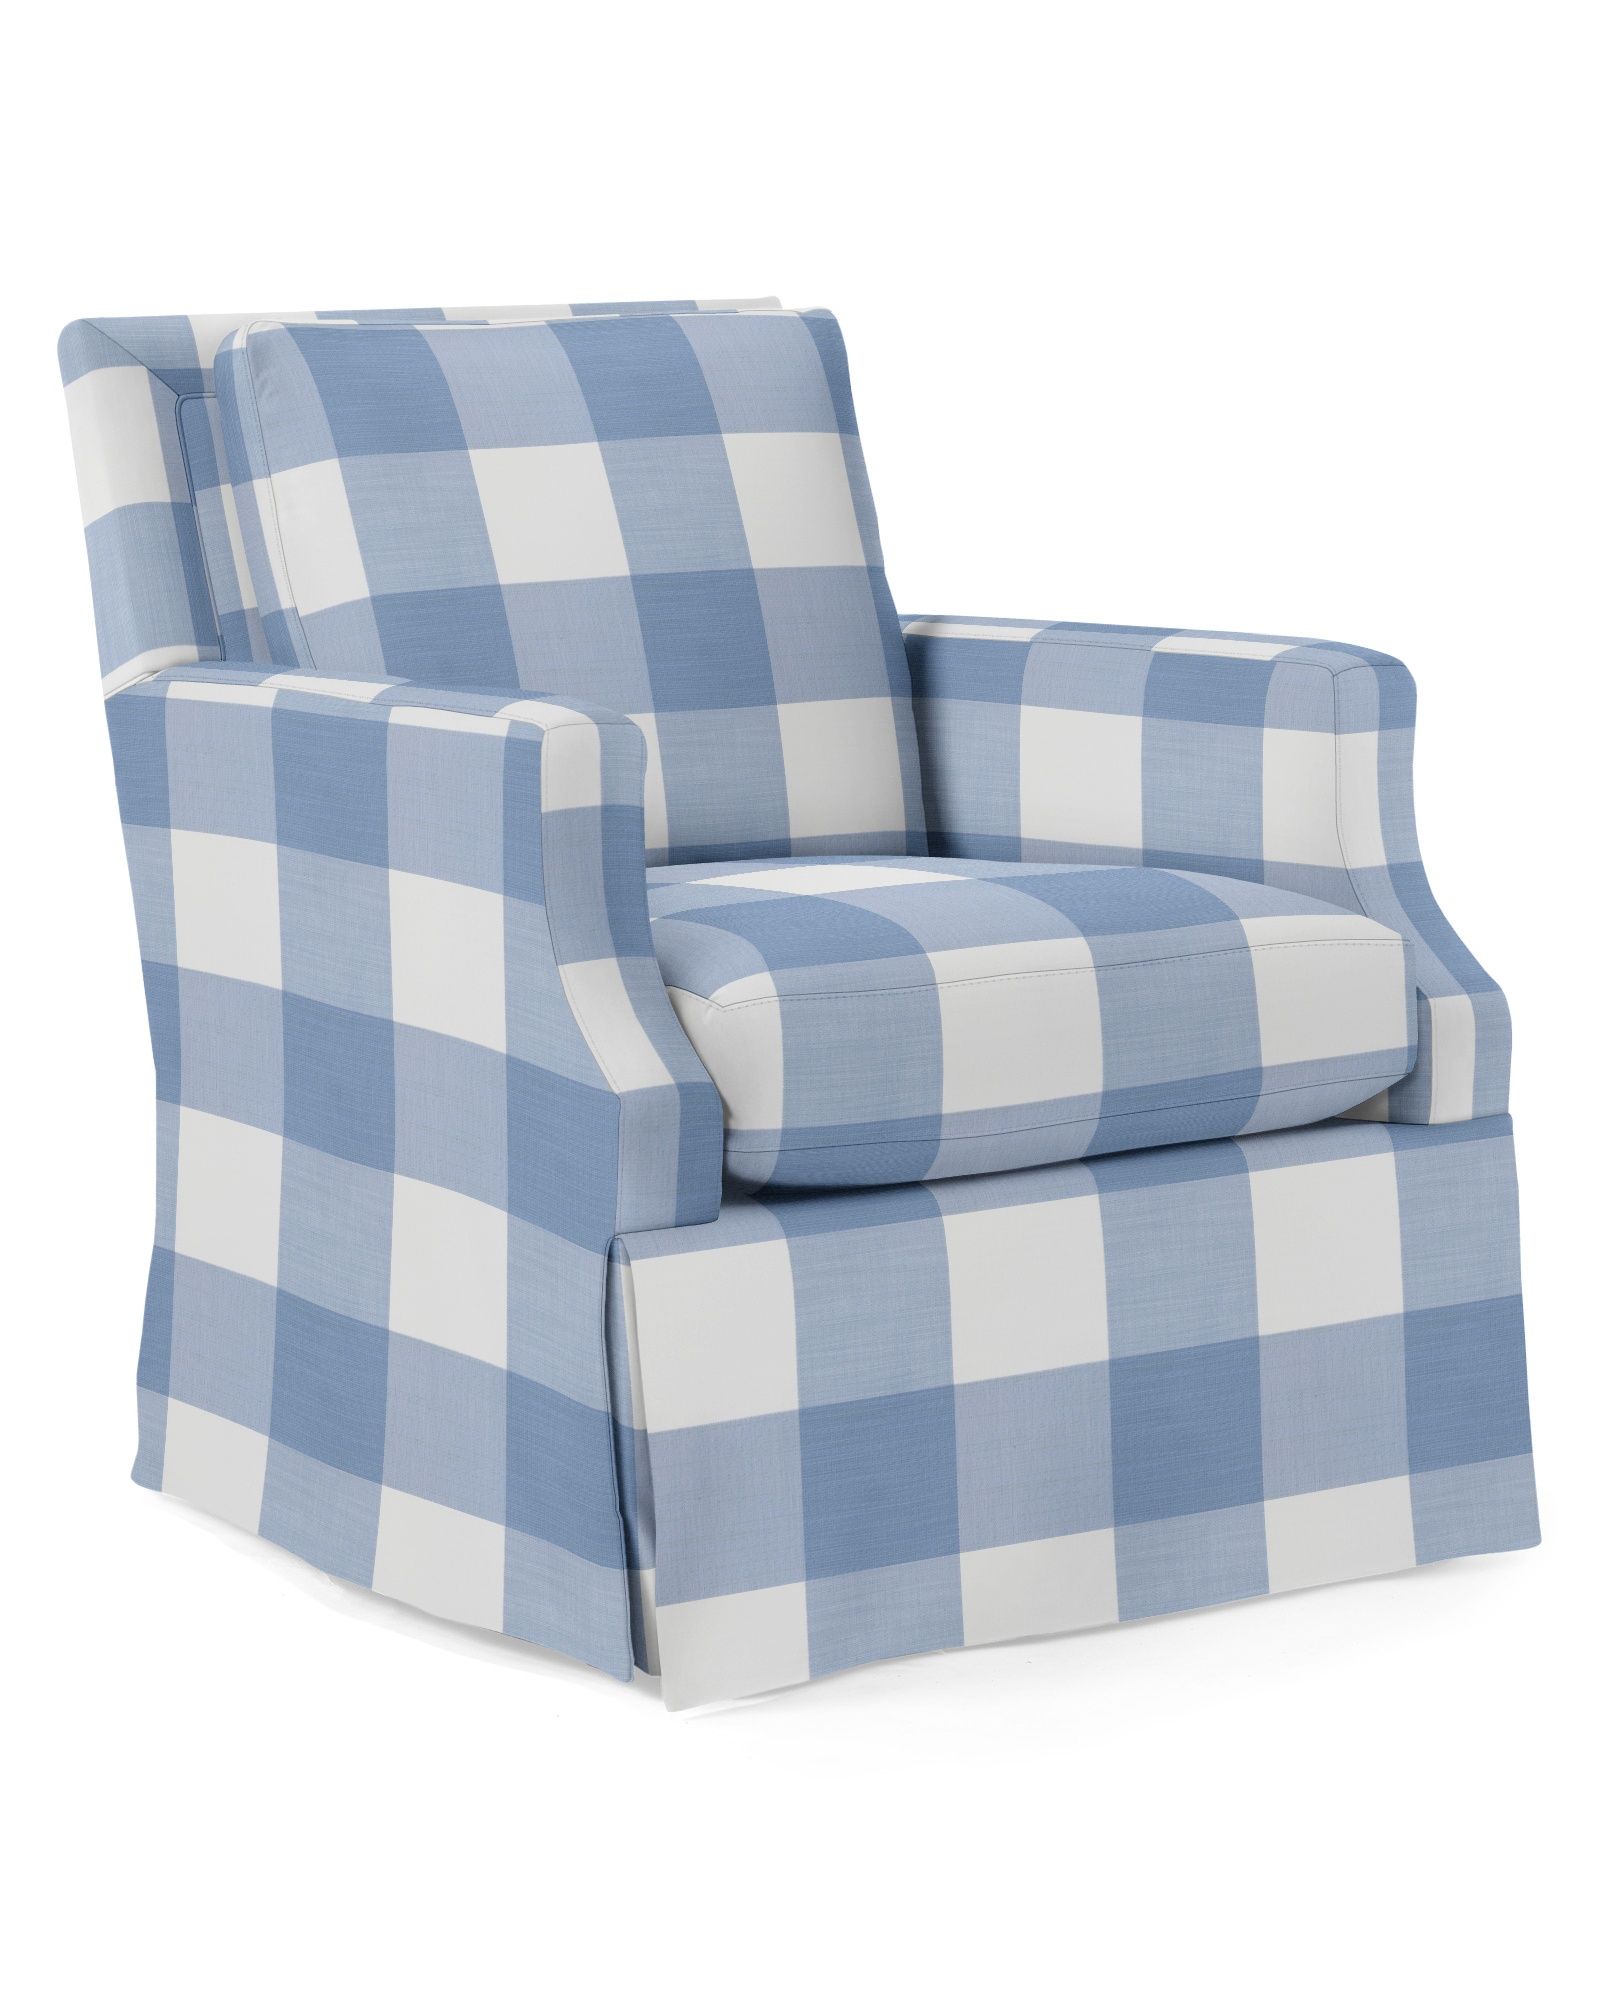 Grady Swivel Glider - Skirted | Serena and Lily